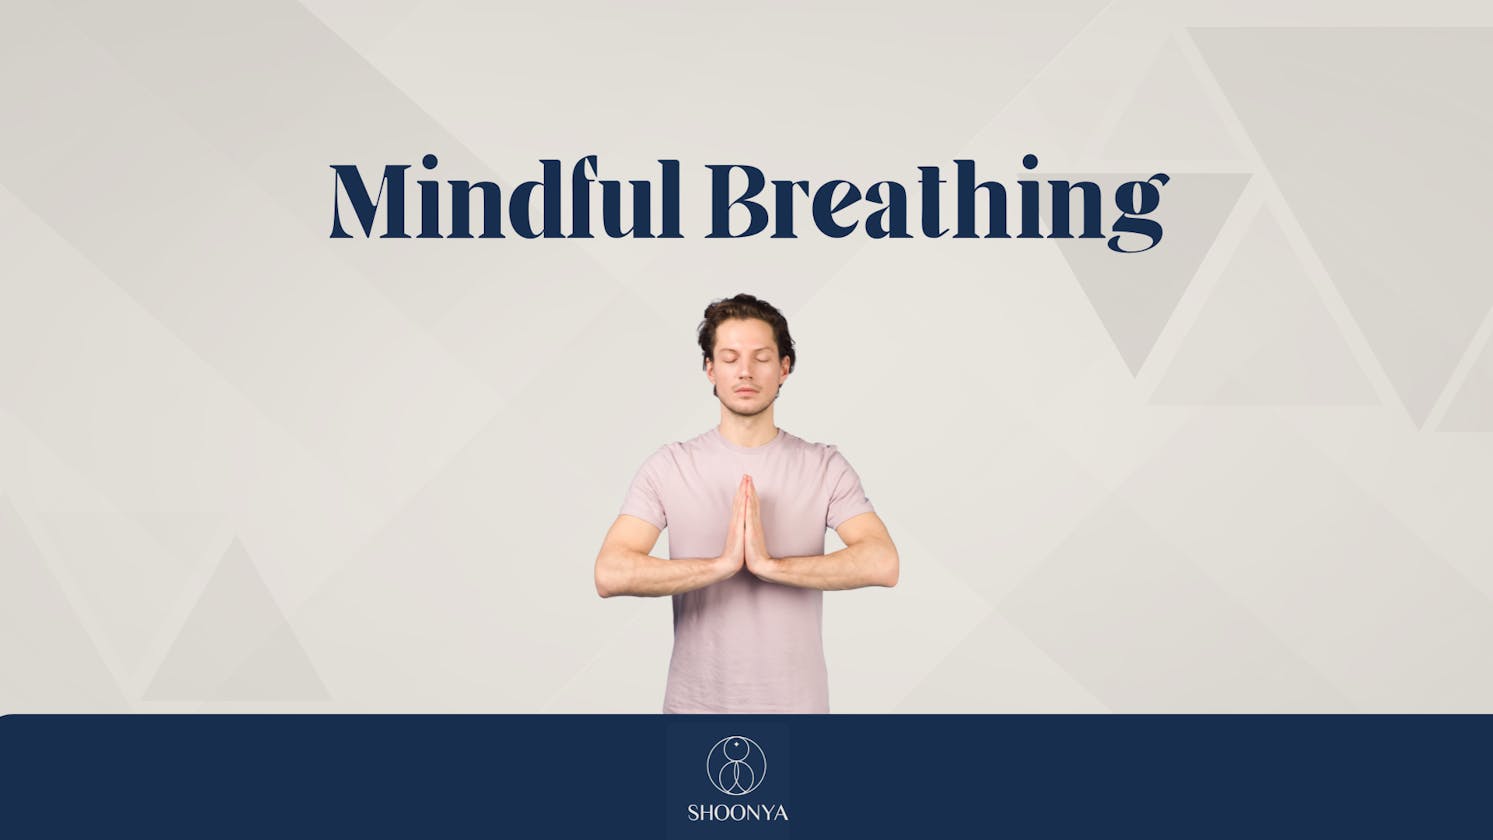 Every Breath You Take: Transforming Life with Mindfulness